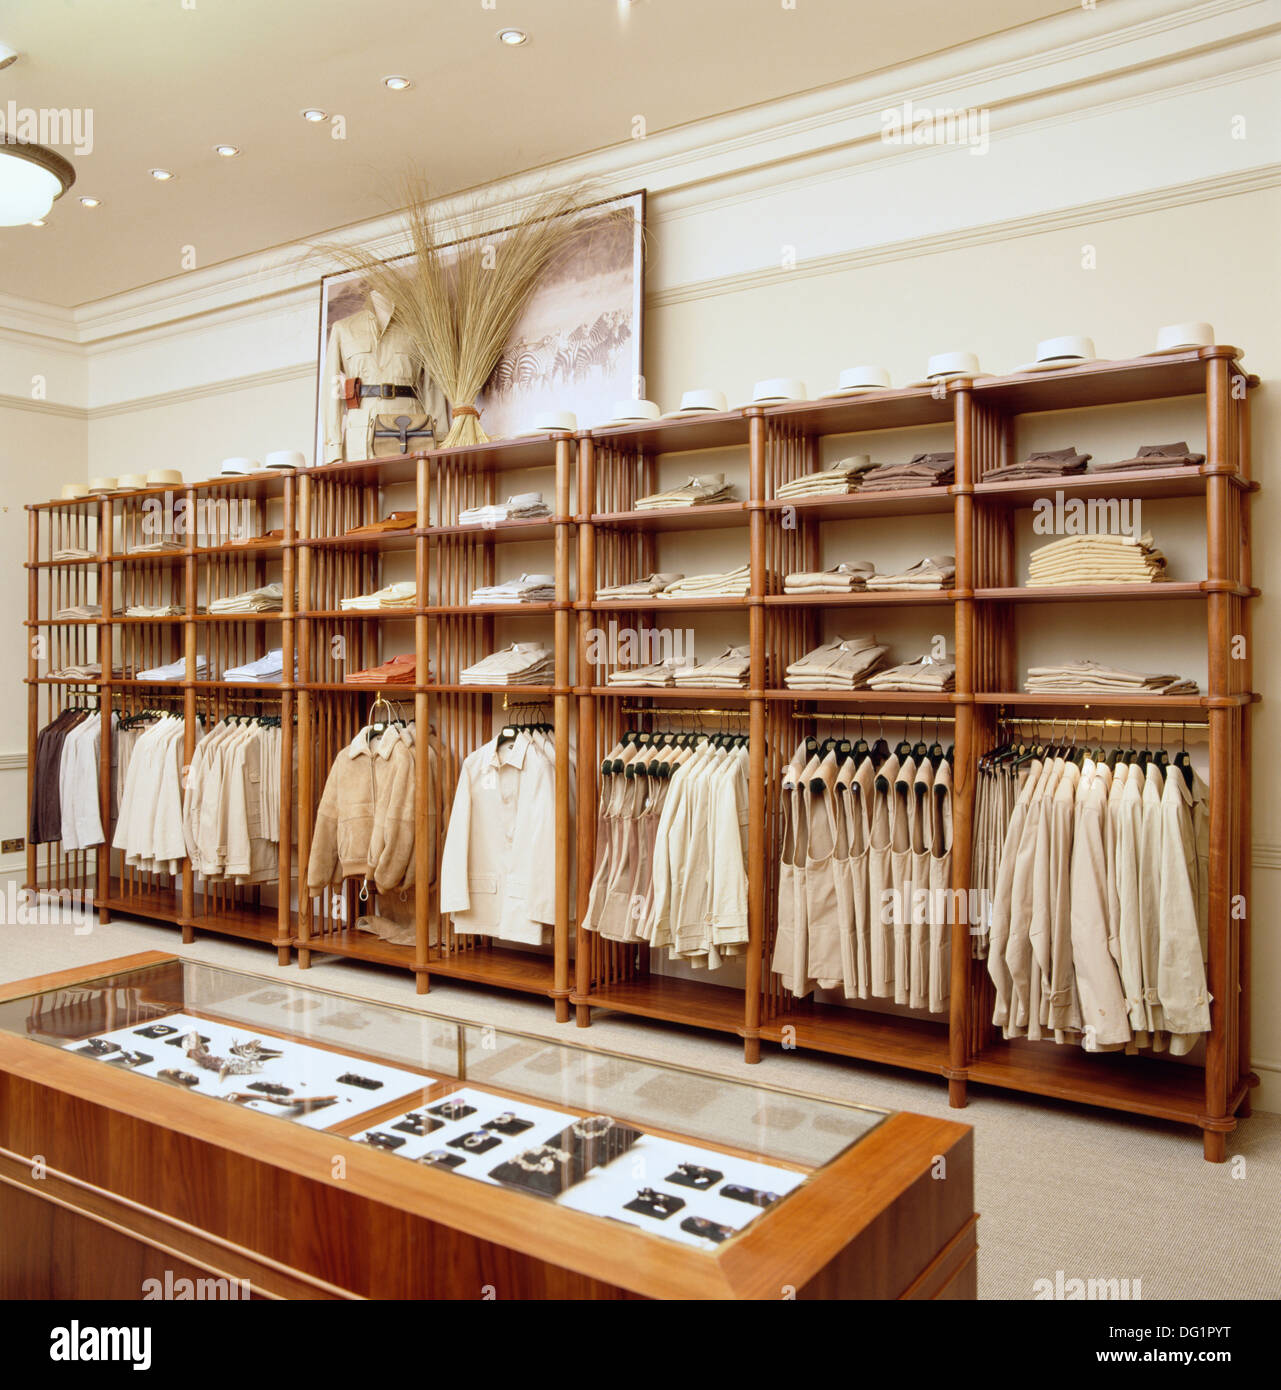 Upmarket men's clothing shop with cream shirts and jackets hanging on rails  below display shelves Stock Photo - Alamy